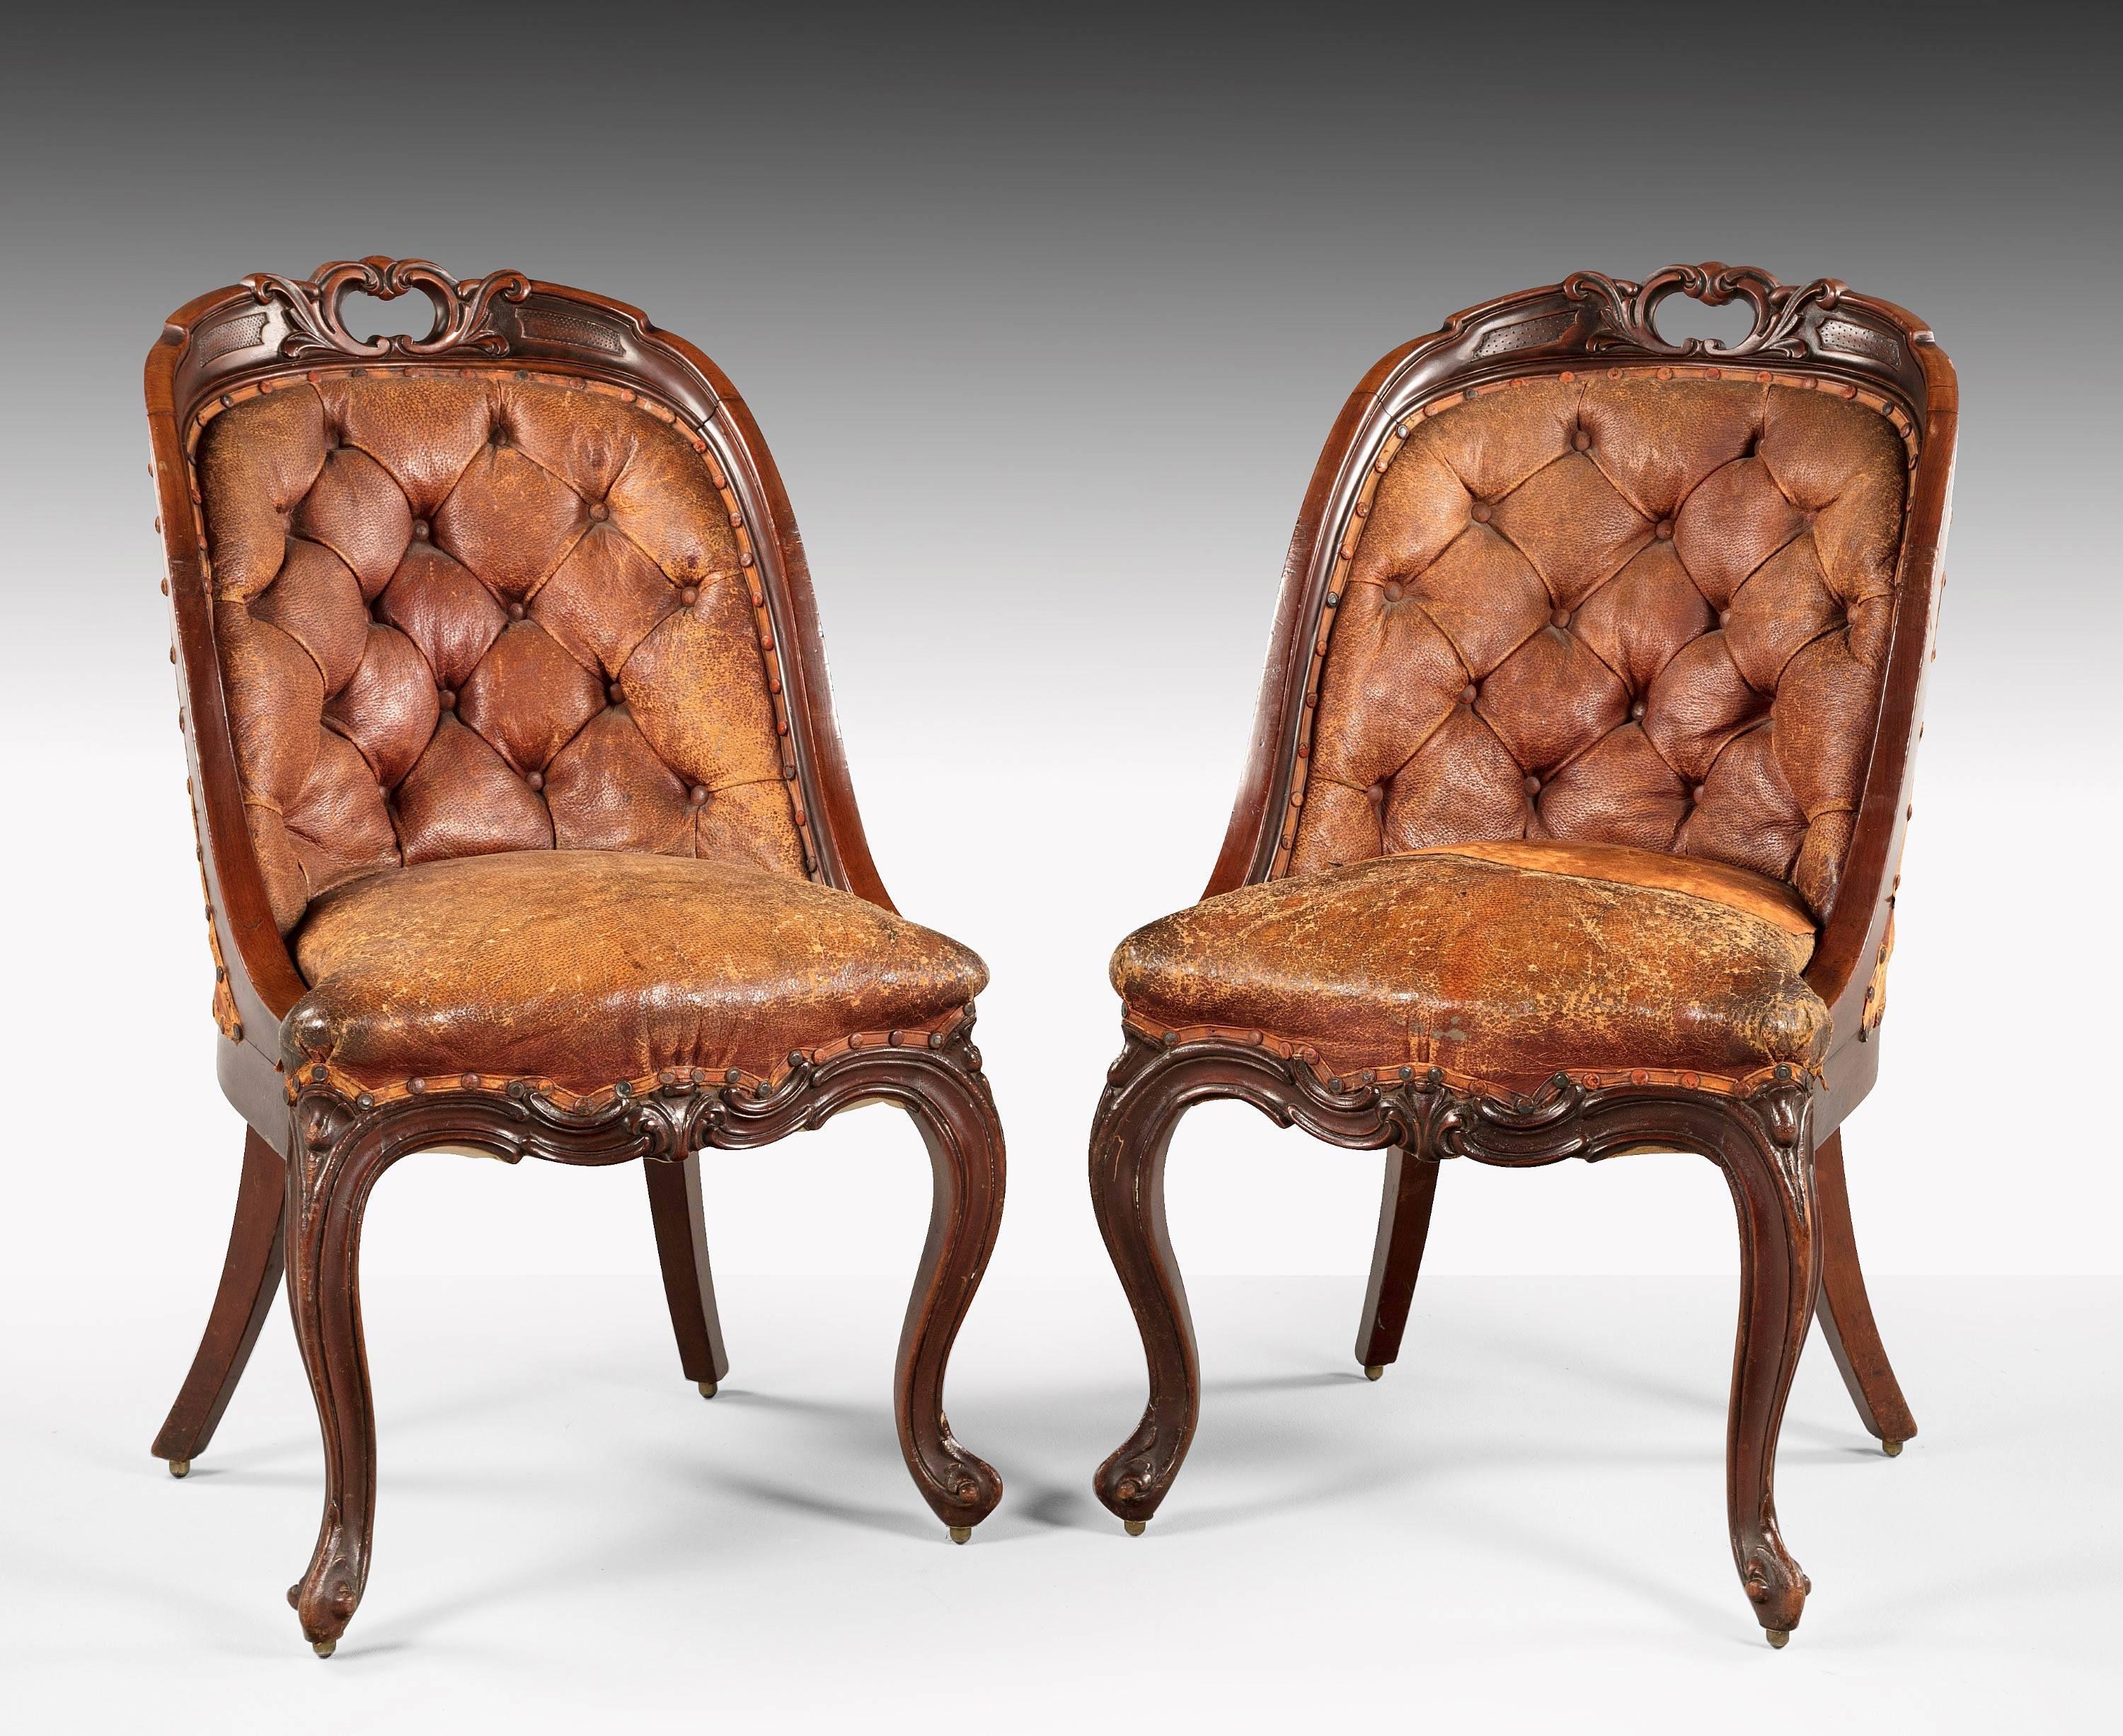 A quite extraordinary set of ten mid-19th century mahogany chairs in amazing original condition, including the hide covers. 

Seat height 18.5 inches.